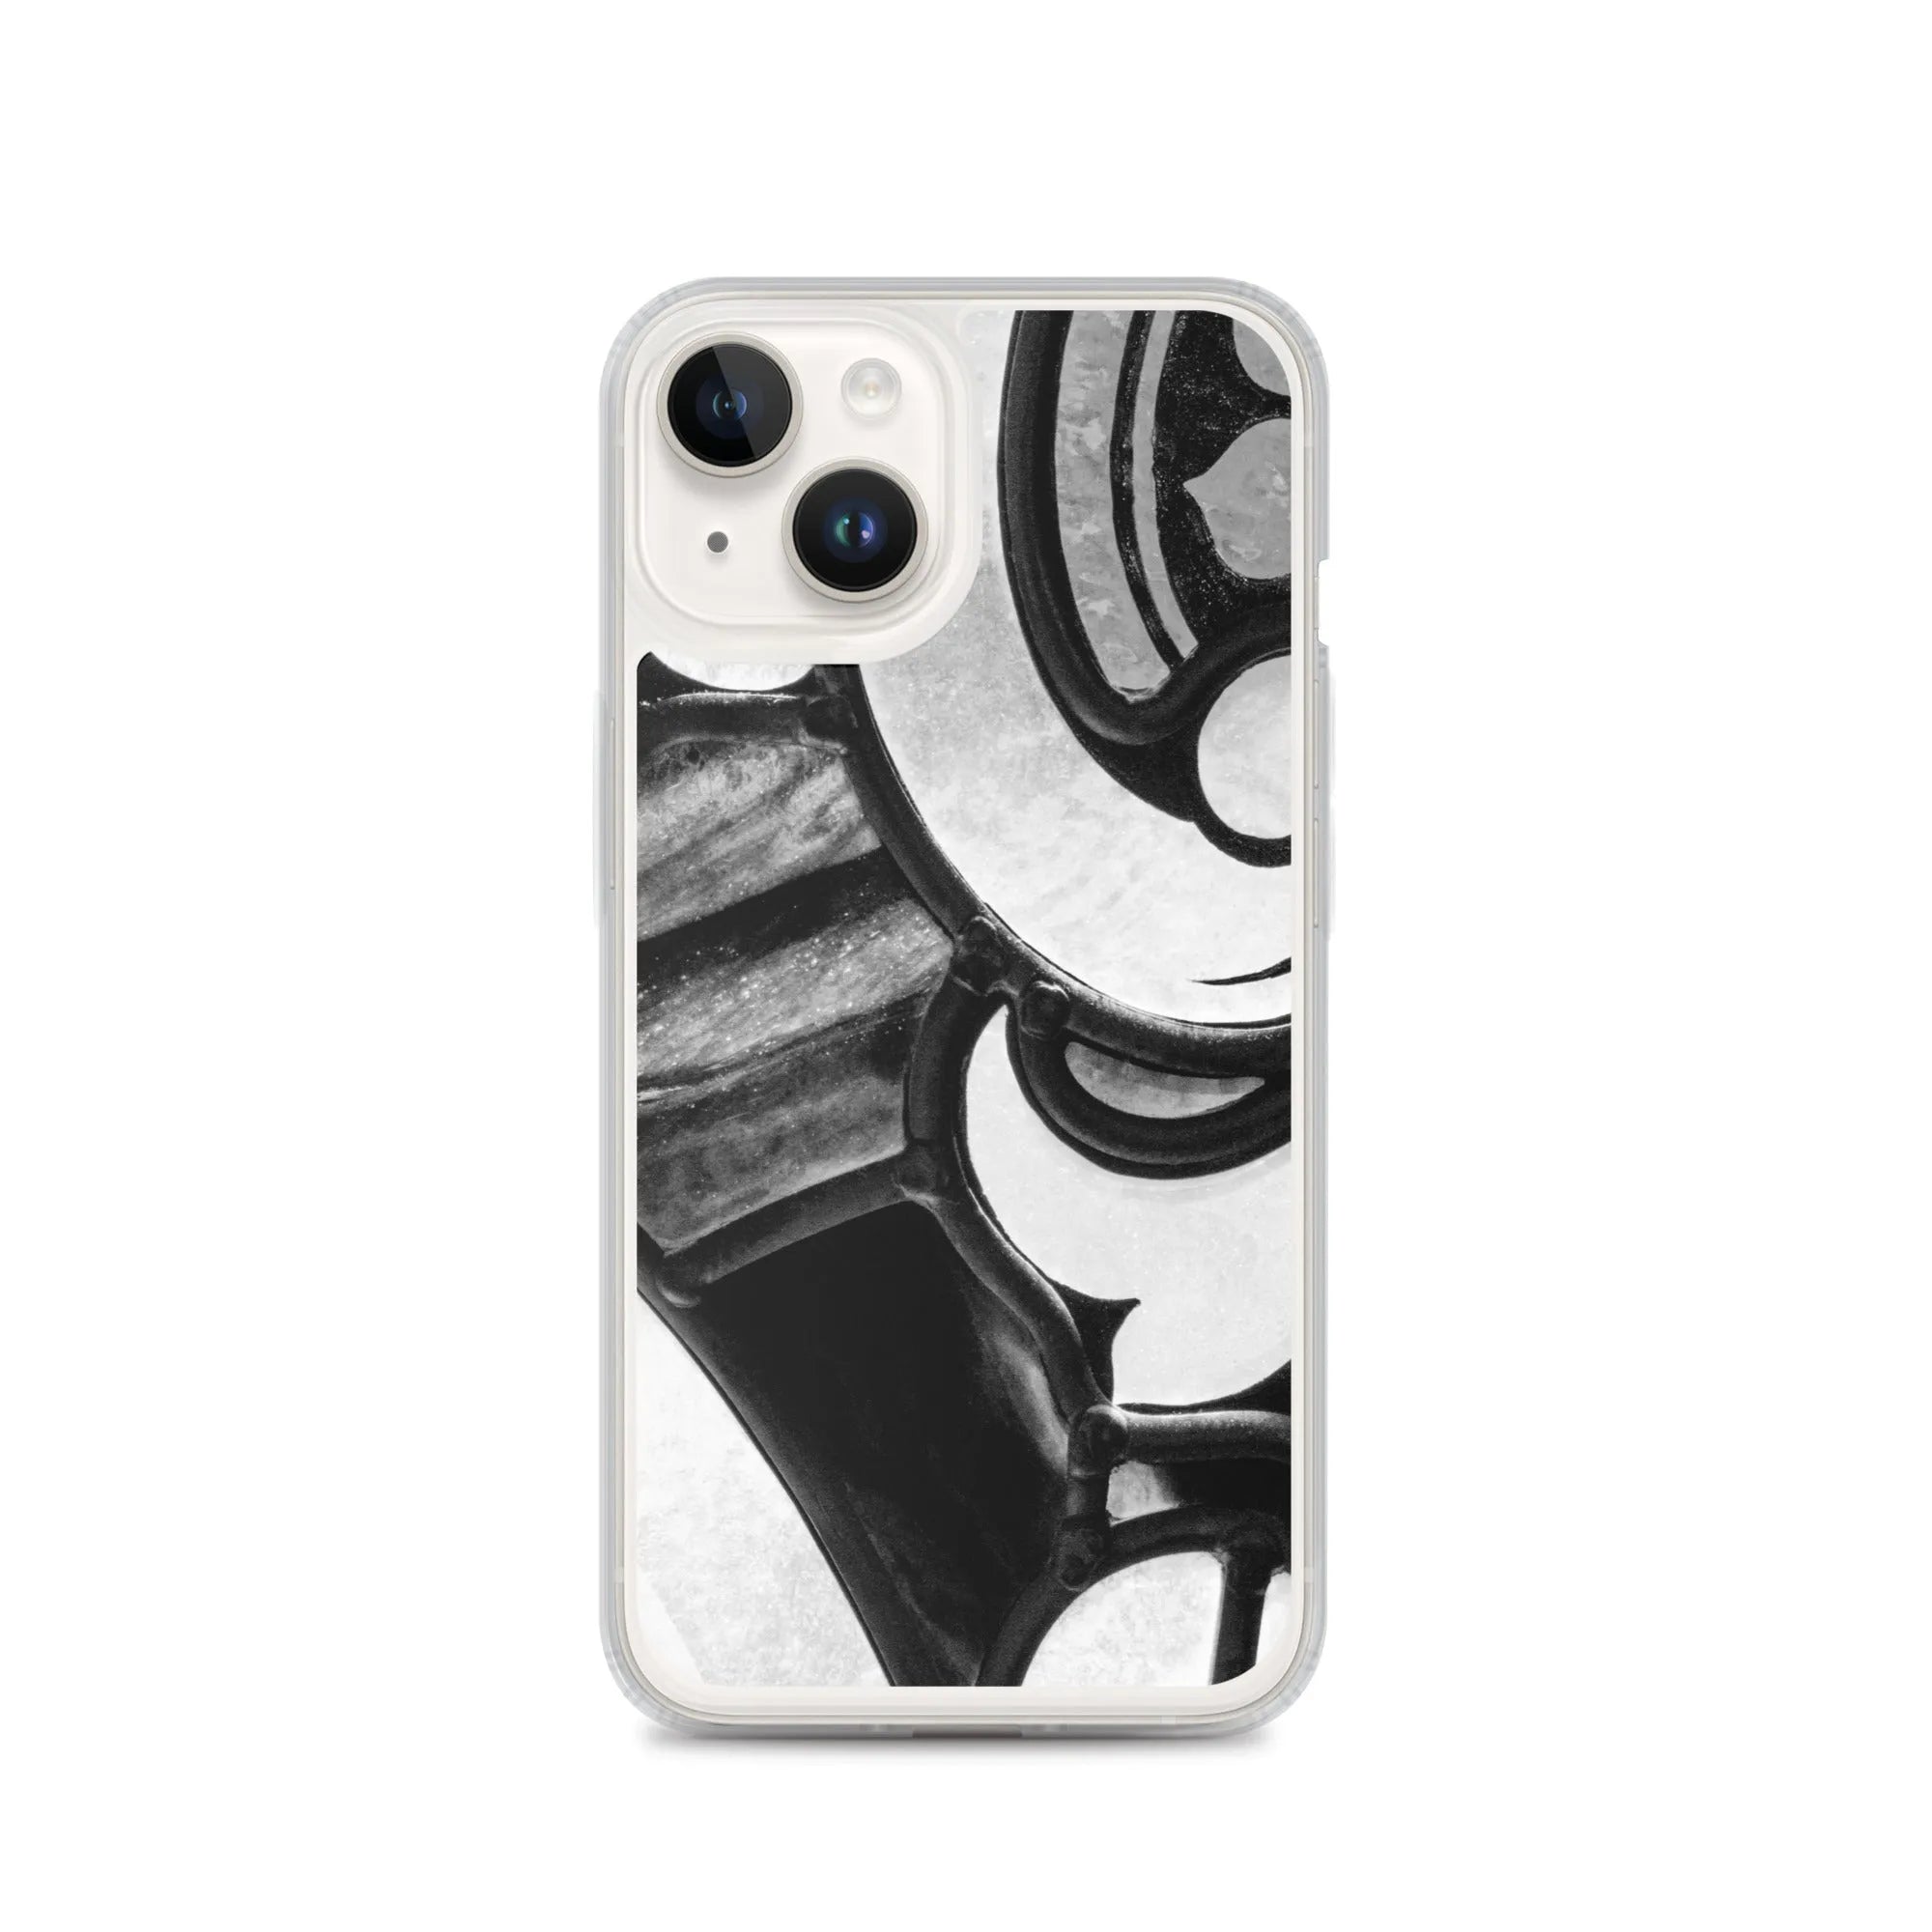 Stay Glassy - Designer Travels Art Iphone Case - Black And White - Iphone 14 - Mobile Phone Cases - Aesthetic Art